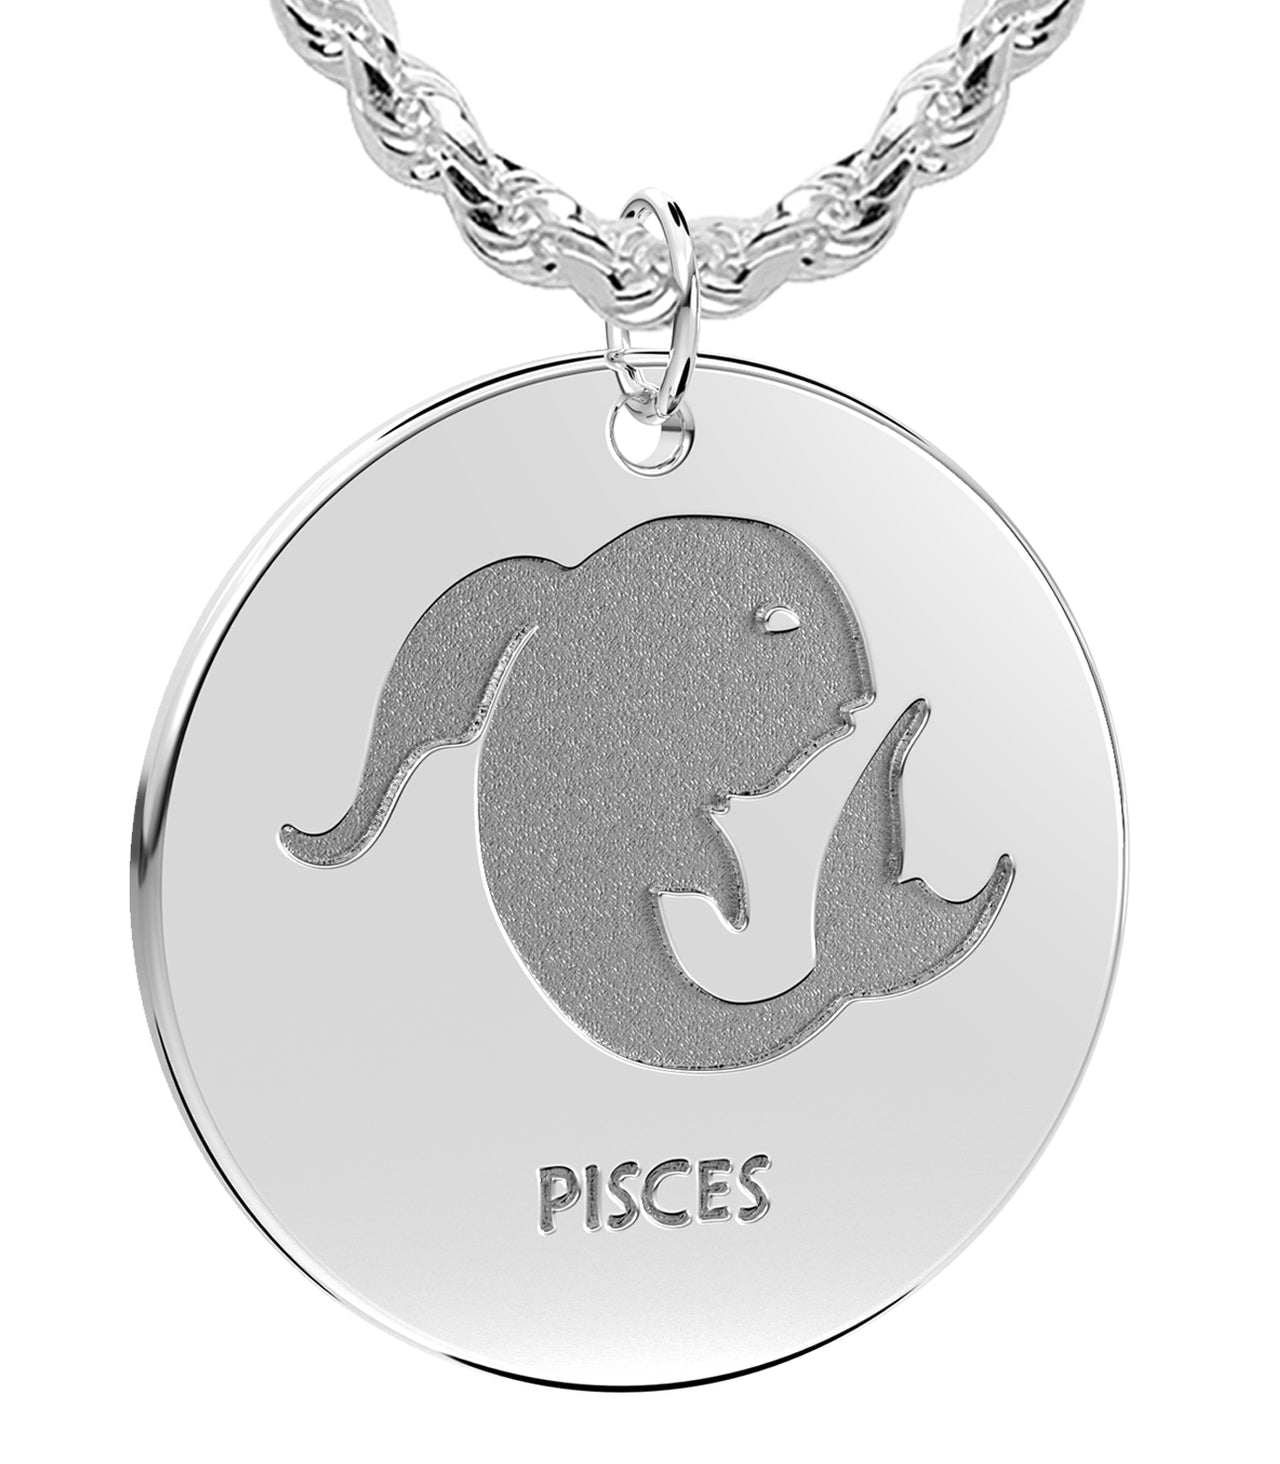 Men's 925 Sterling Silver 1in Pisces Fishes February & March Zodiac Pendant Necklace